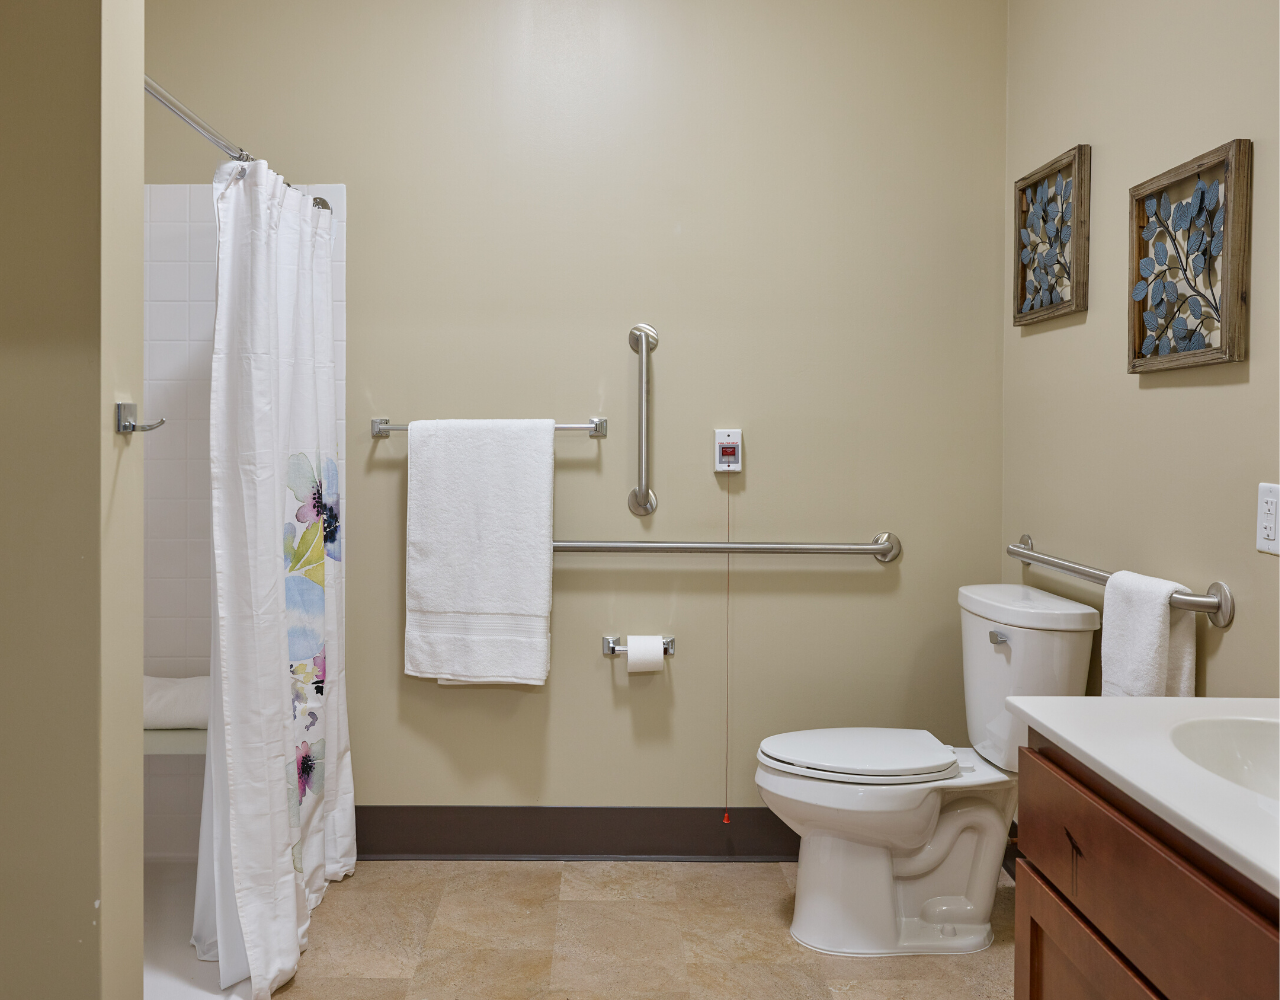 Assisted living 1 bedroom apartment bathroom